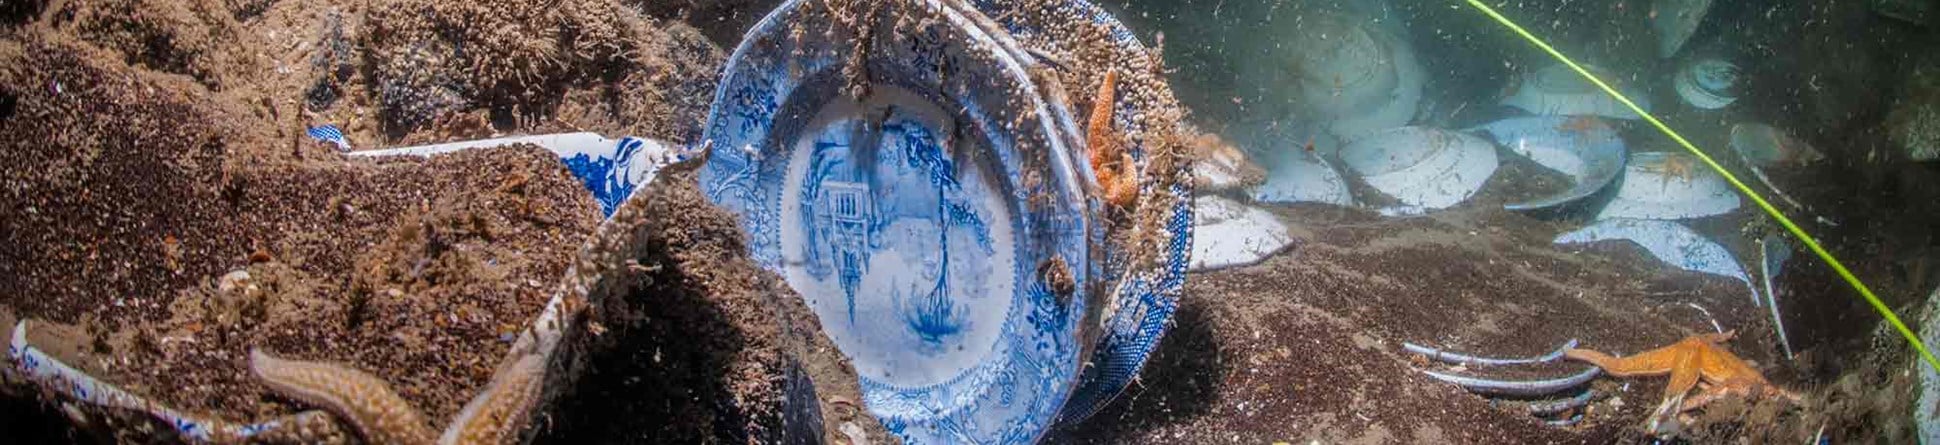 Ceramic plates on the seabed with starfish clinging to them and a shoal of fish in the background